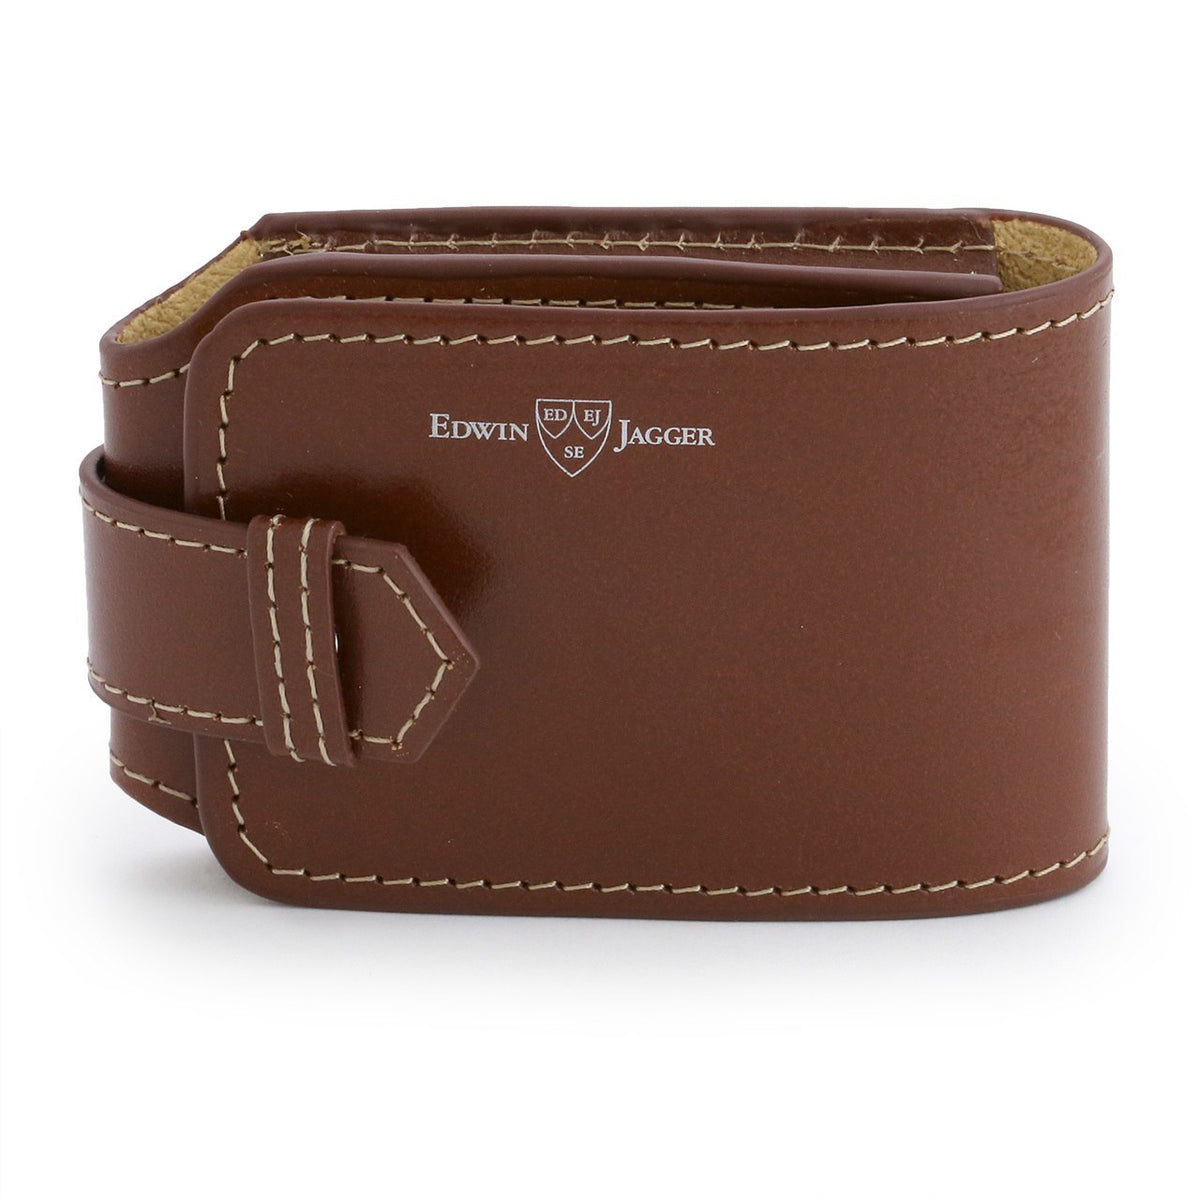 Edwin Jagger Travel set, brown leather case, closed